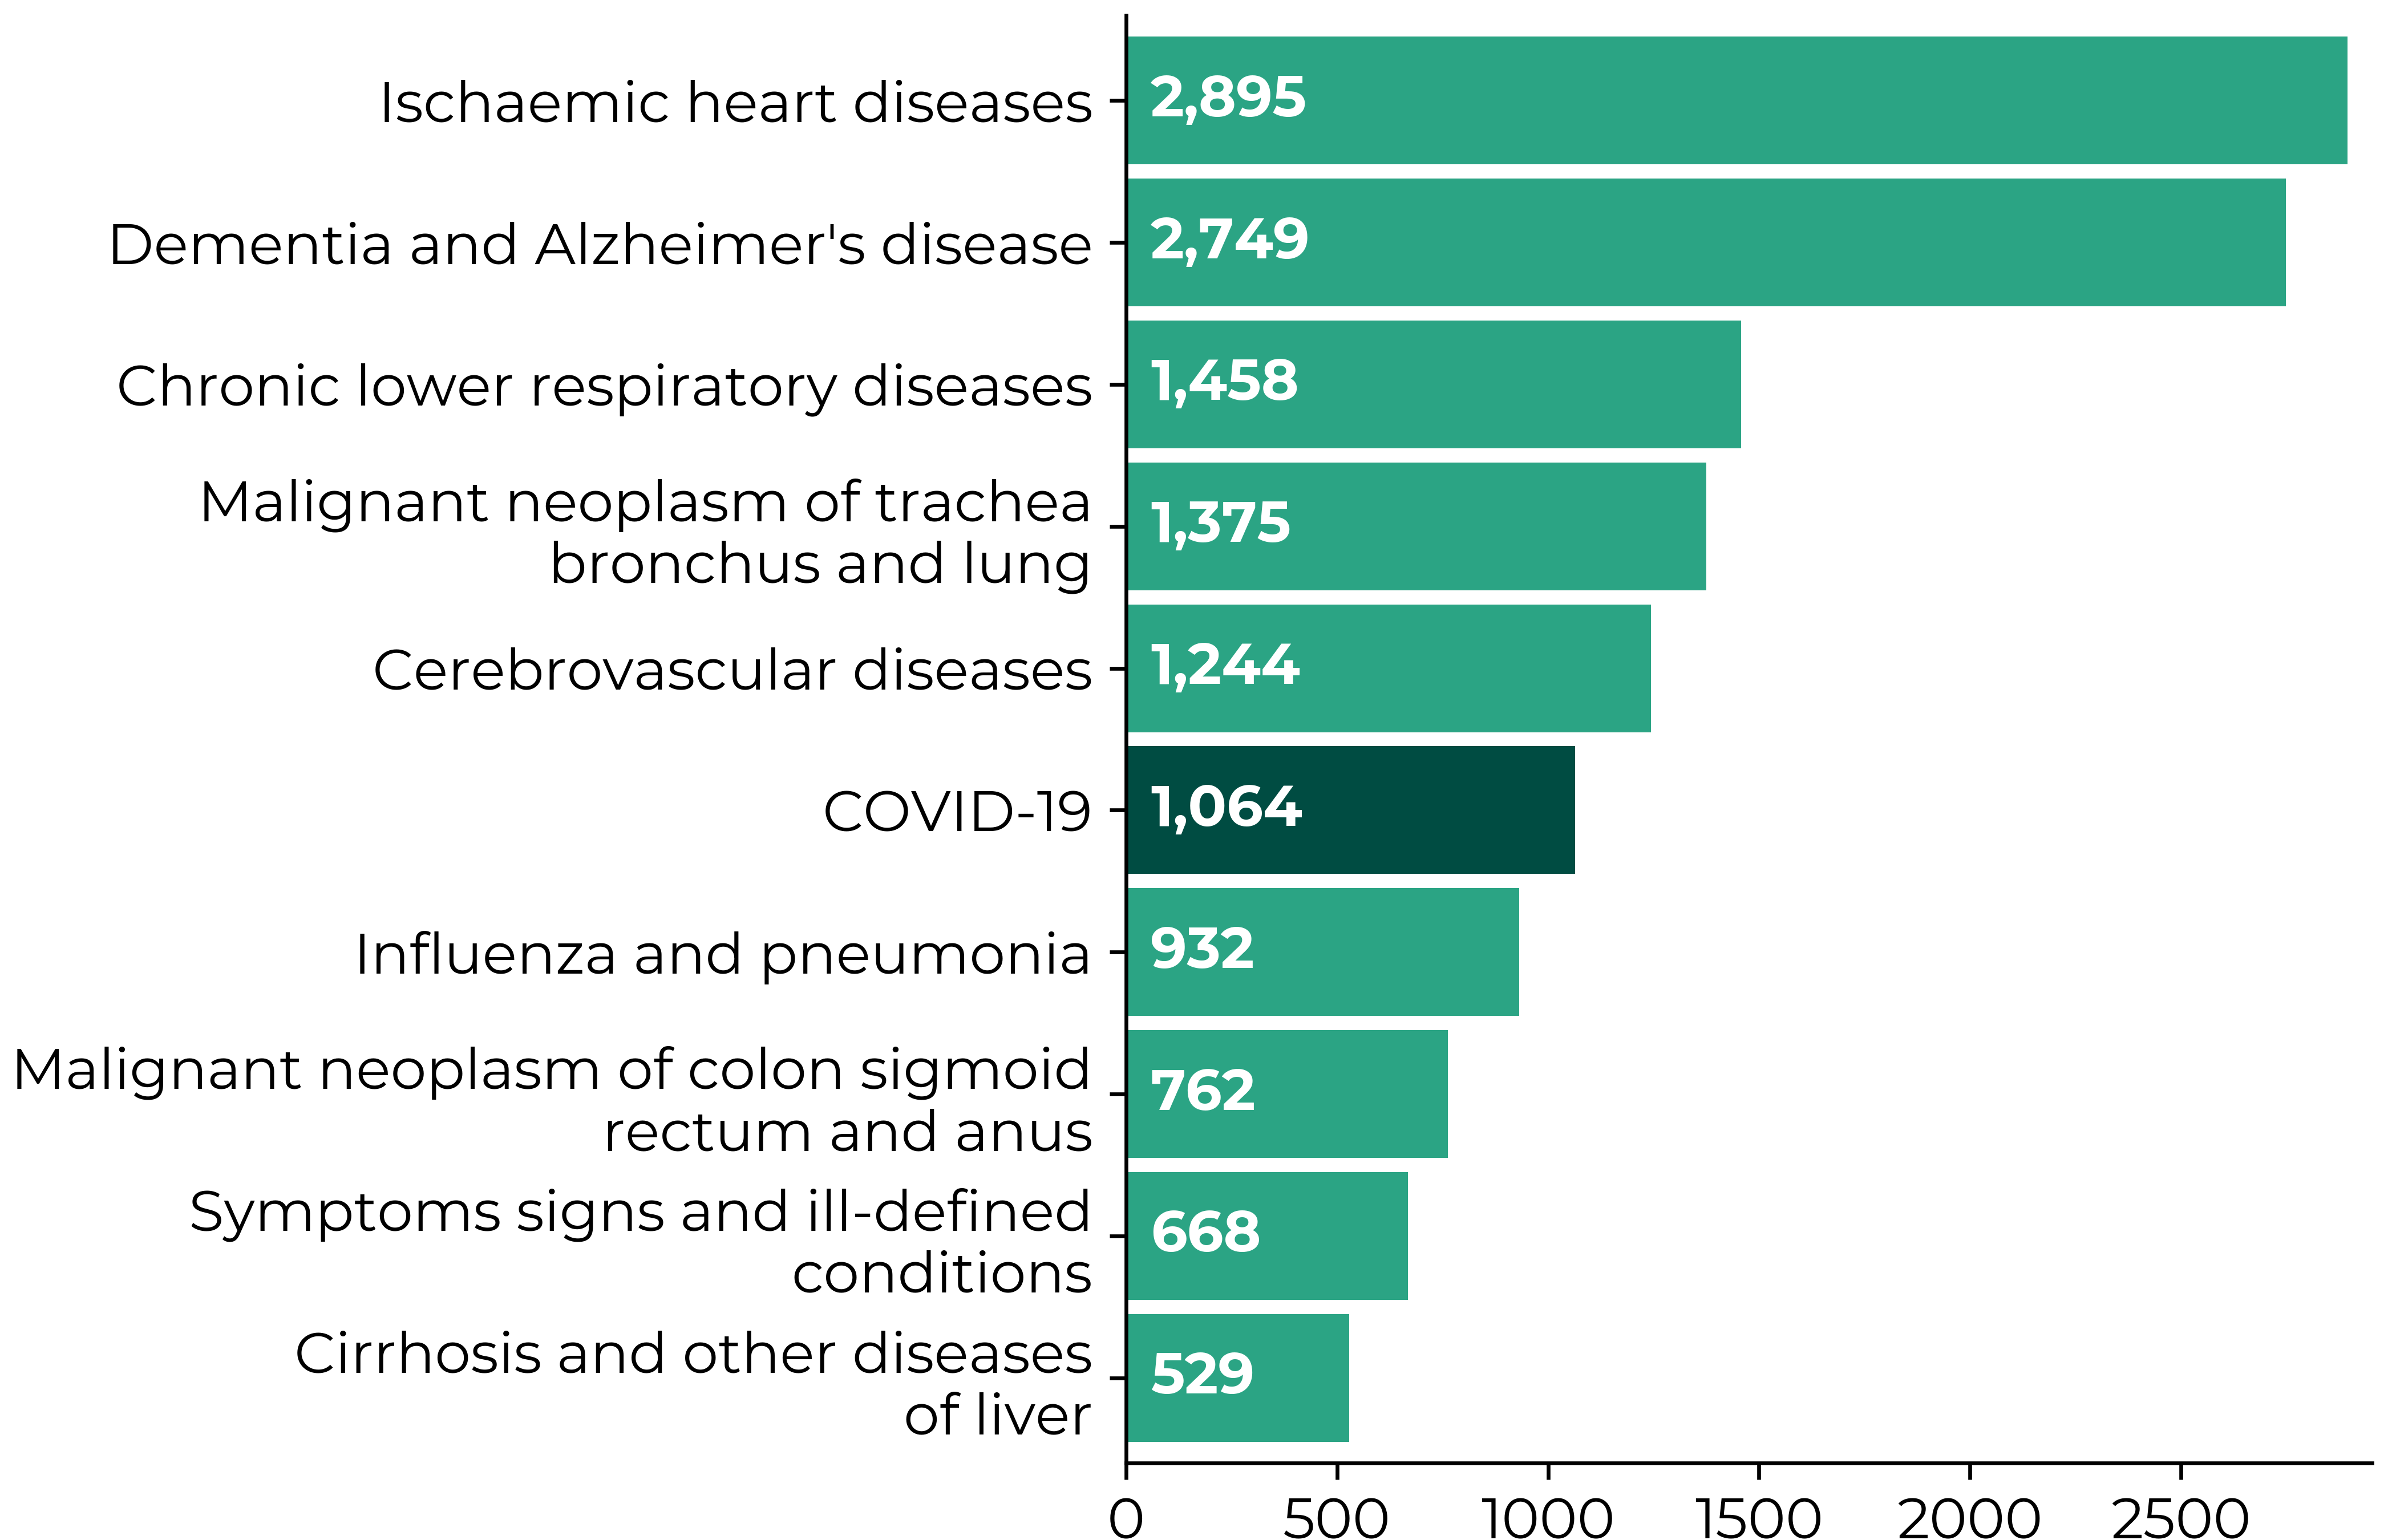 Ischaemic heart diseases 2895, Dementia and Alzheimer's disease 2749, Chronic lower respiratory diseases 1458, Malignant neoplasm of trachea bronchus and lung 1375, Cerebrovascular diseases 1244, COVID-19 1064, Influenza and pneumonia 932, Malignant neoplasm of colon sigmoid rectum and anus 762, Symptoms signs and ill-defined conditions 668, Cirrhosis and other diseases of liver 529.